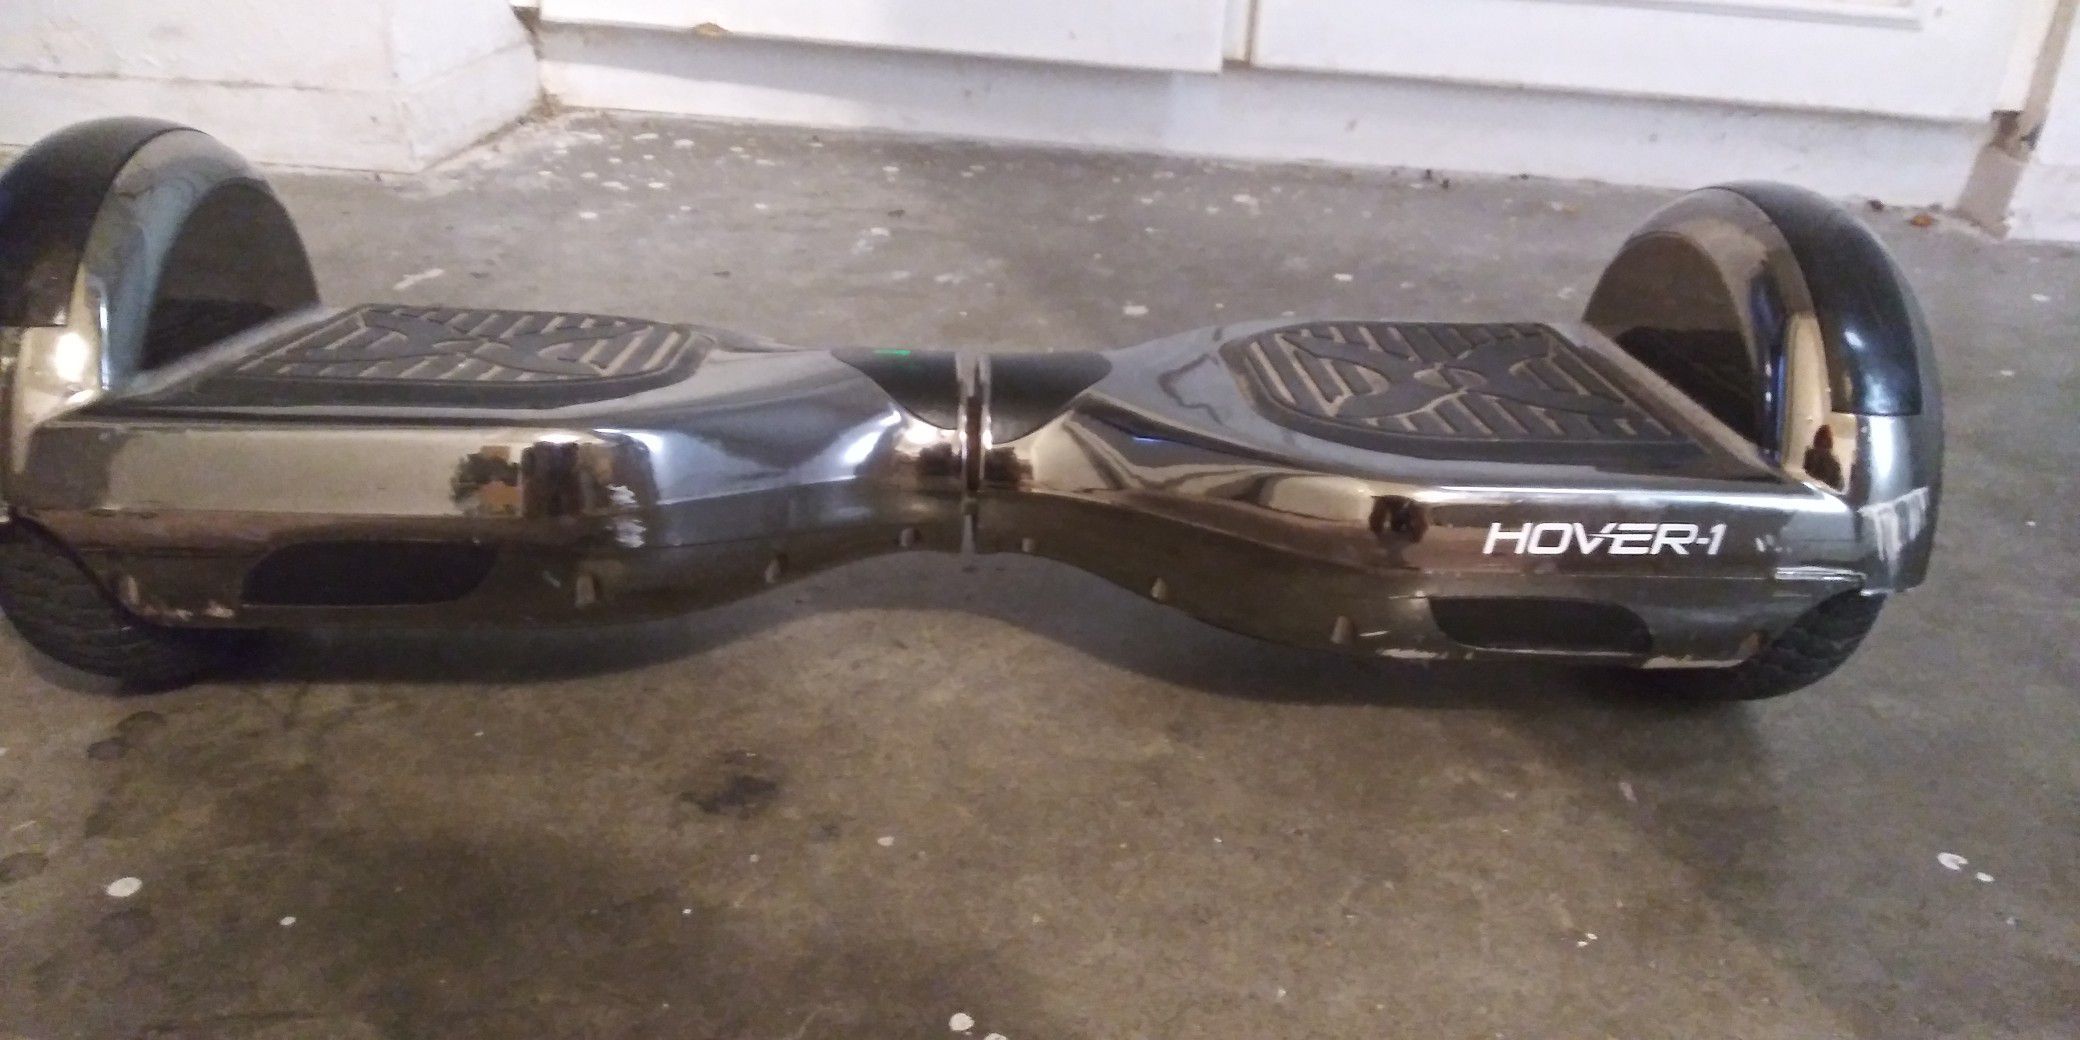 Hoverboard NO CHARGER BUT WORKS